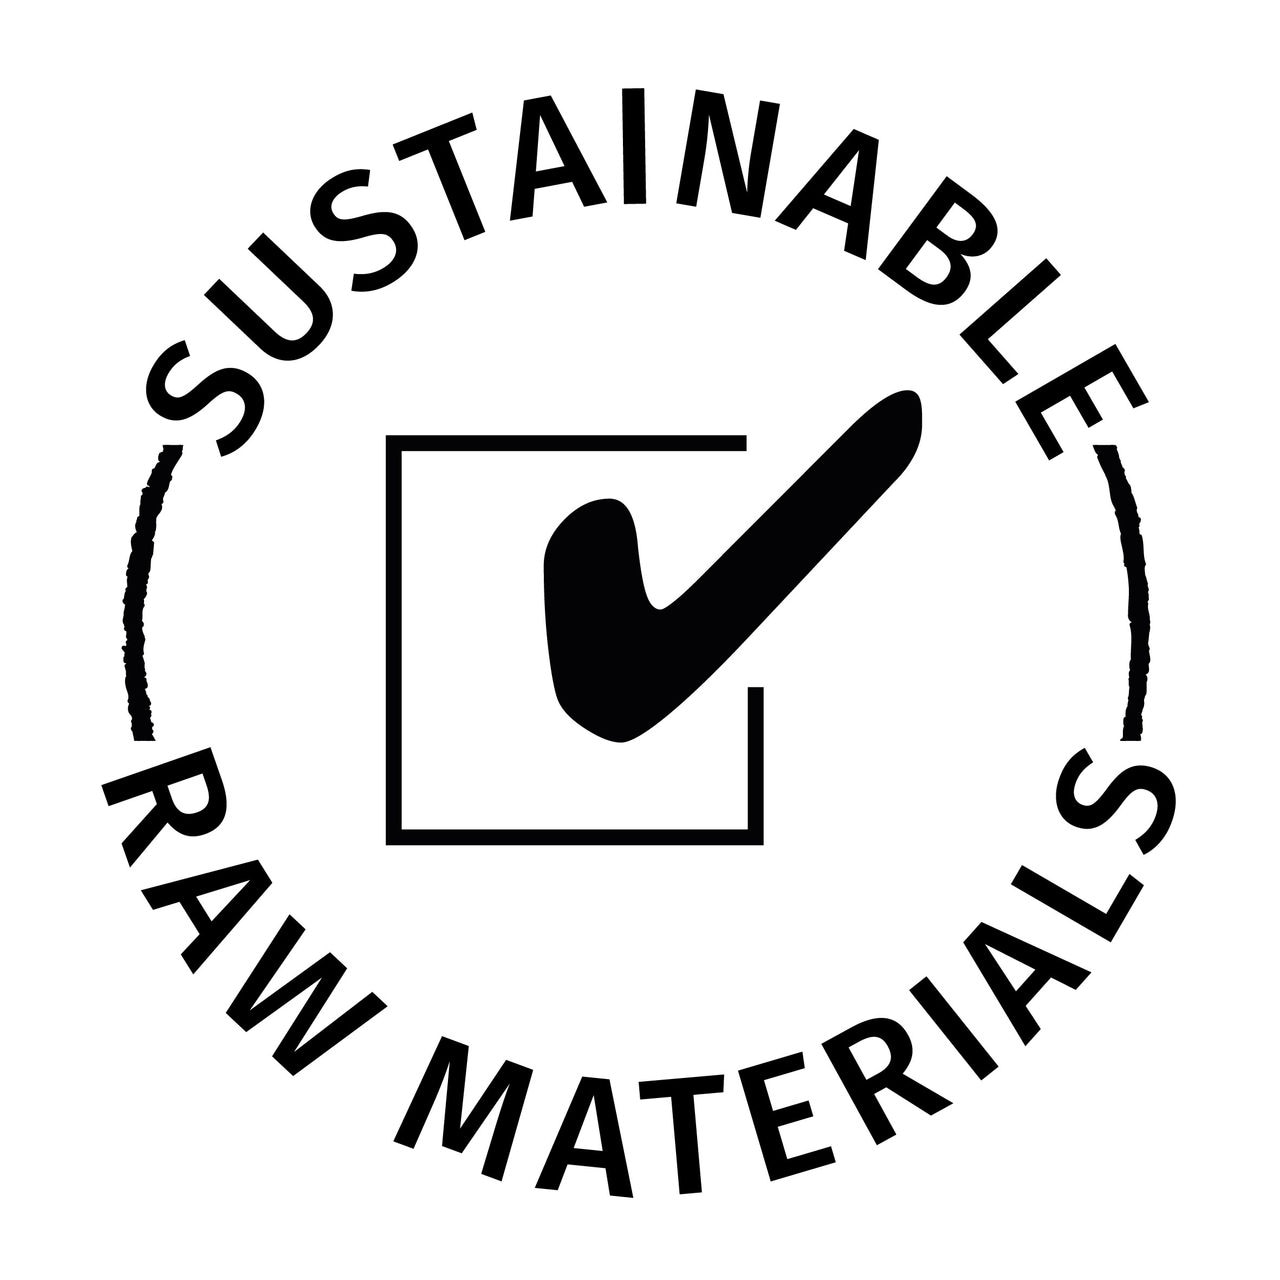 Sustainable raw materials